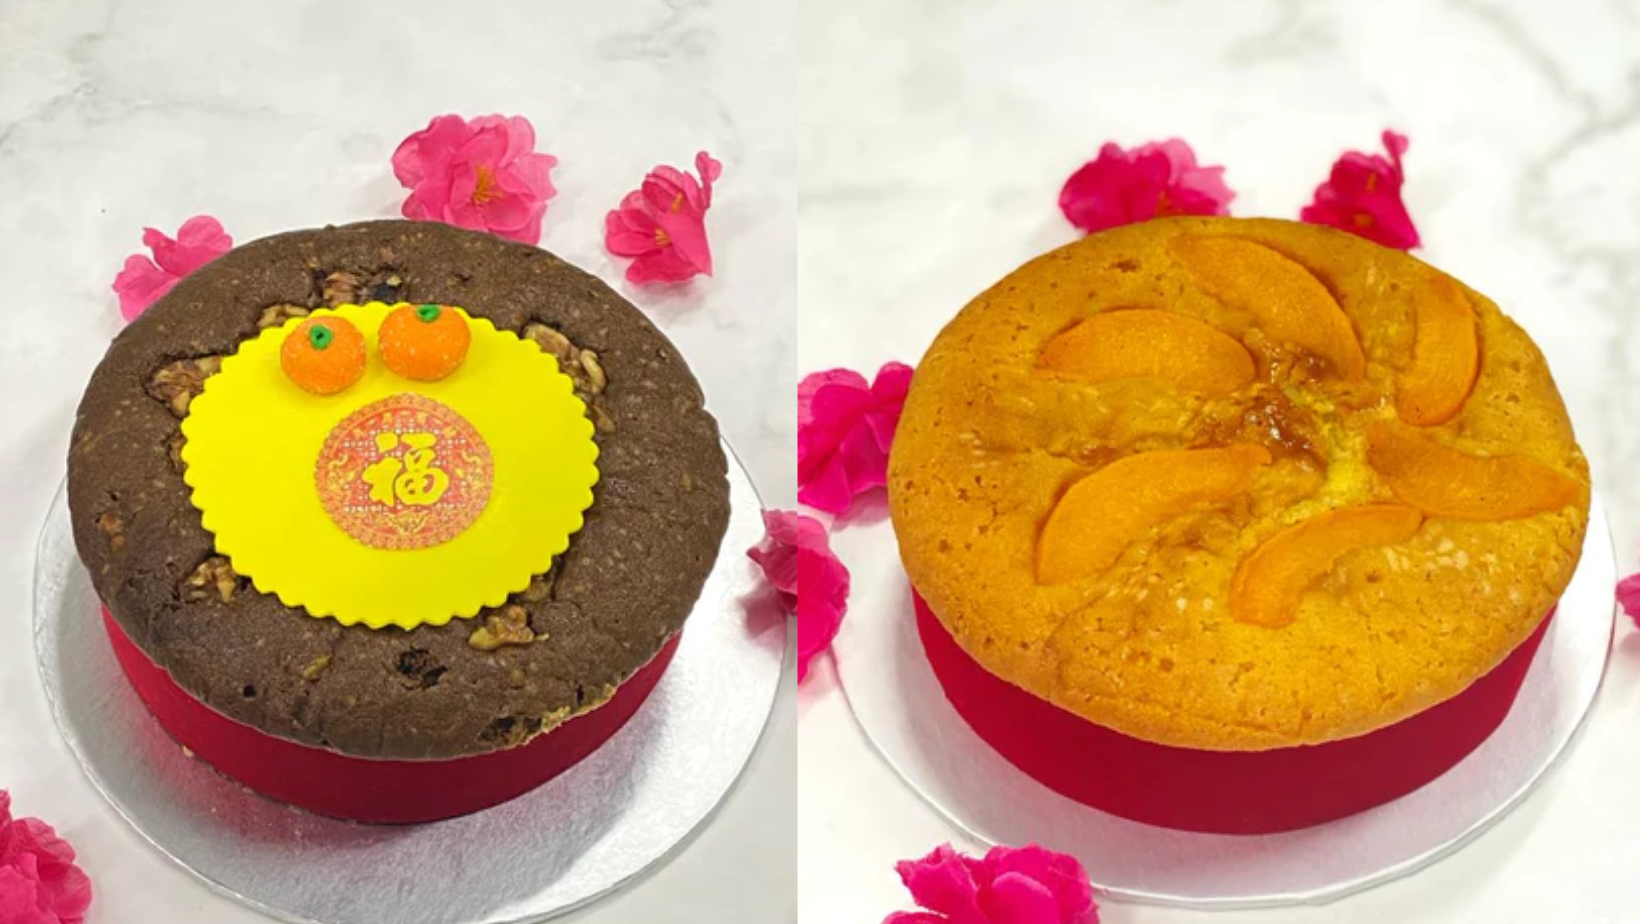 CNY Treats Galore: Eunos Cake Delivery and Irresistible CNY Goodies